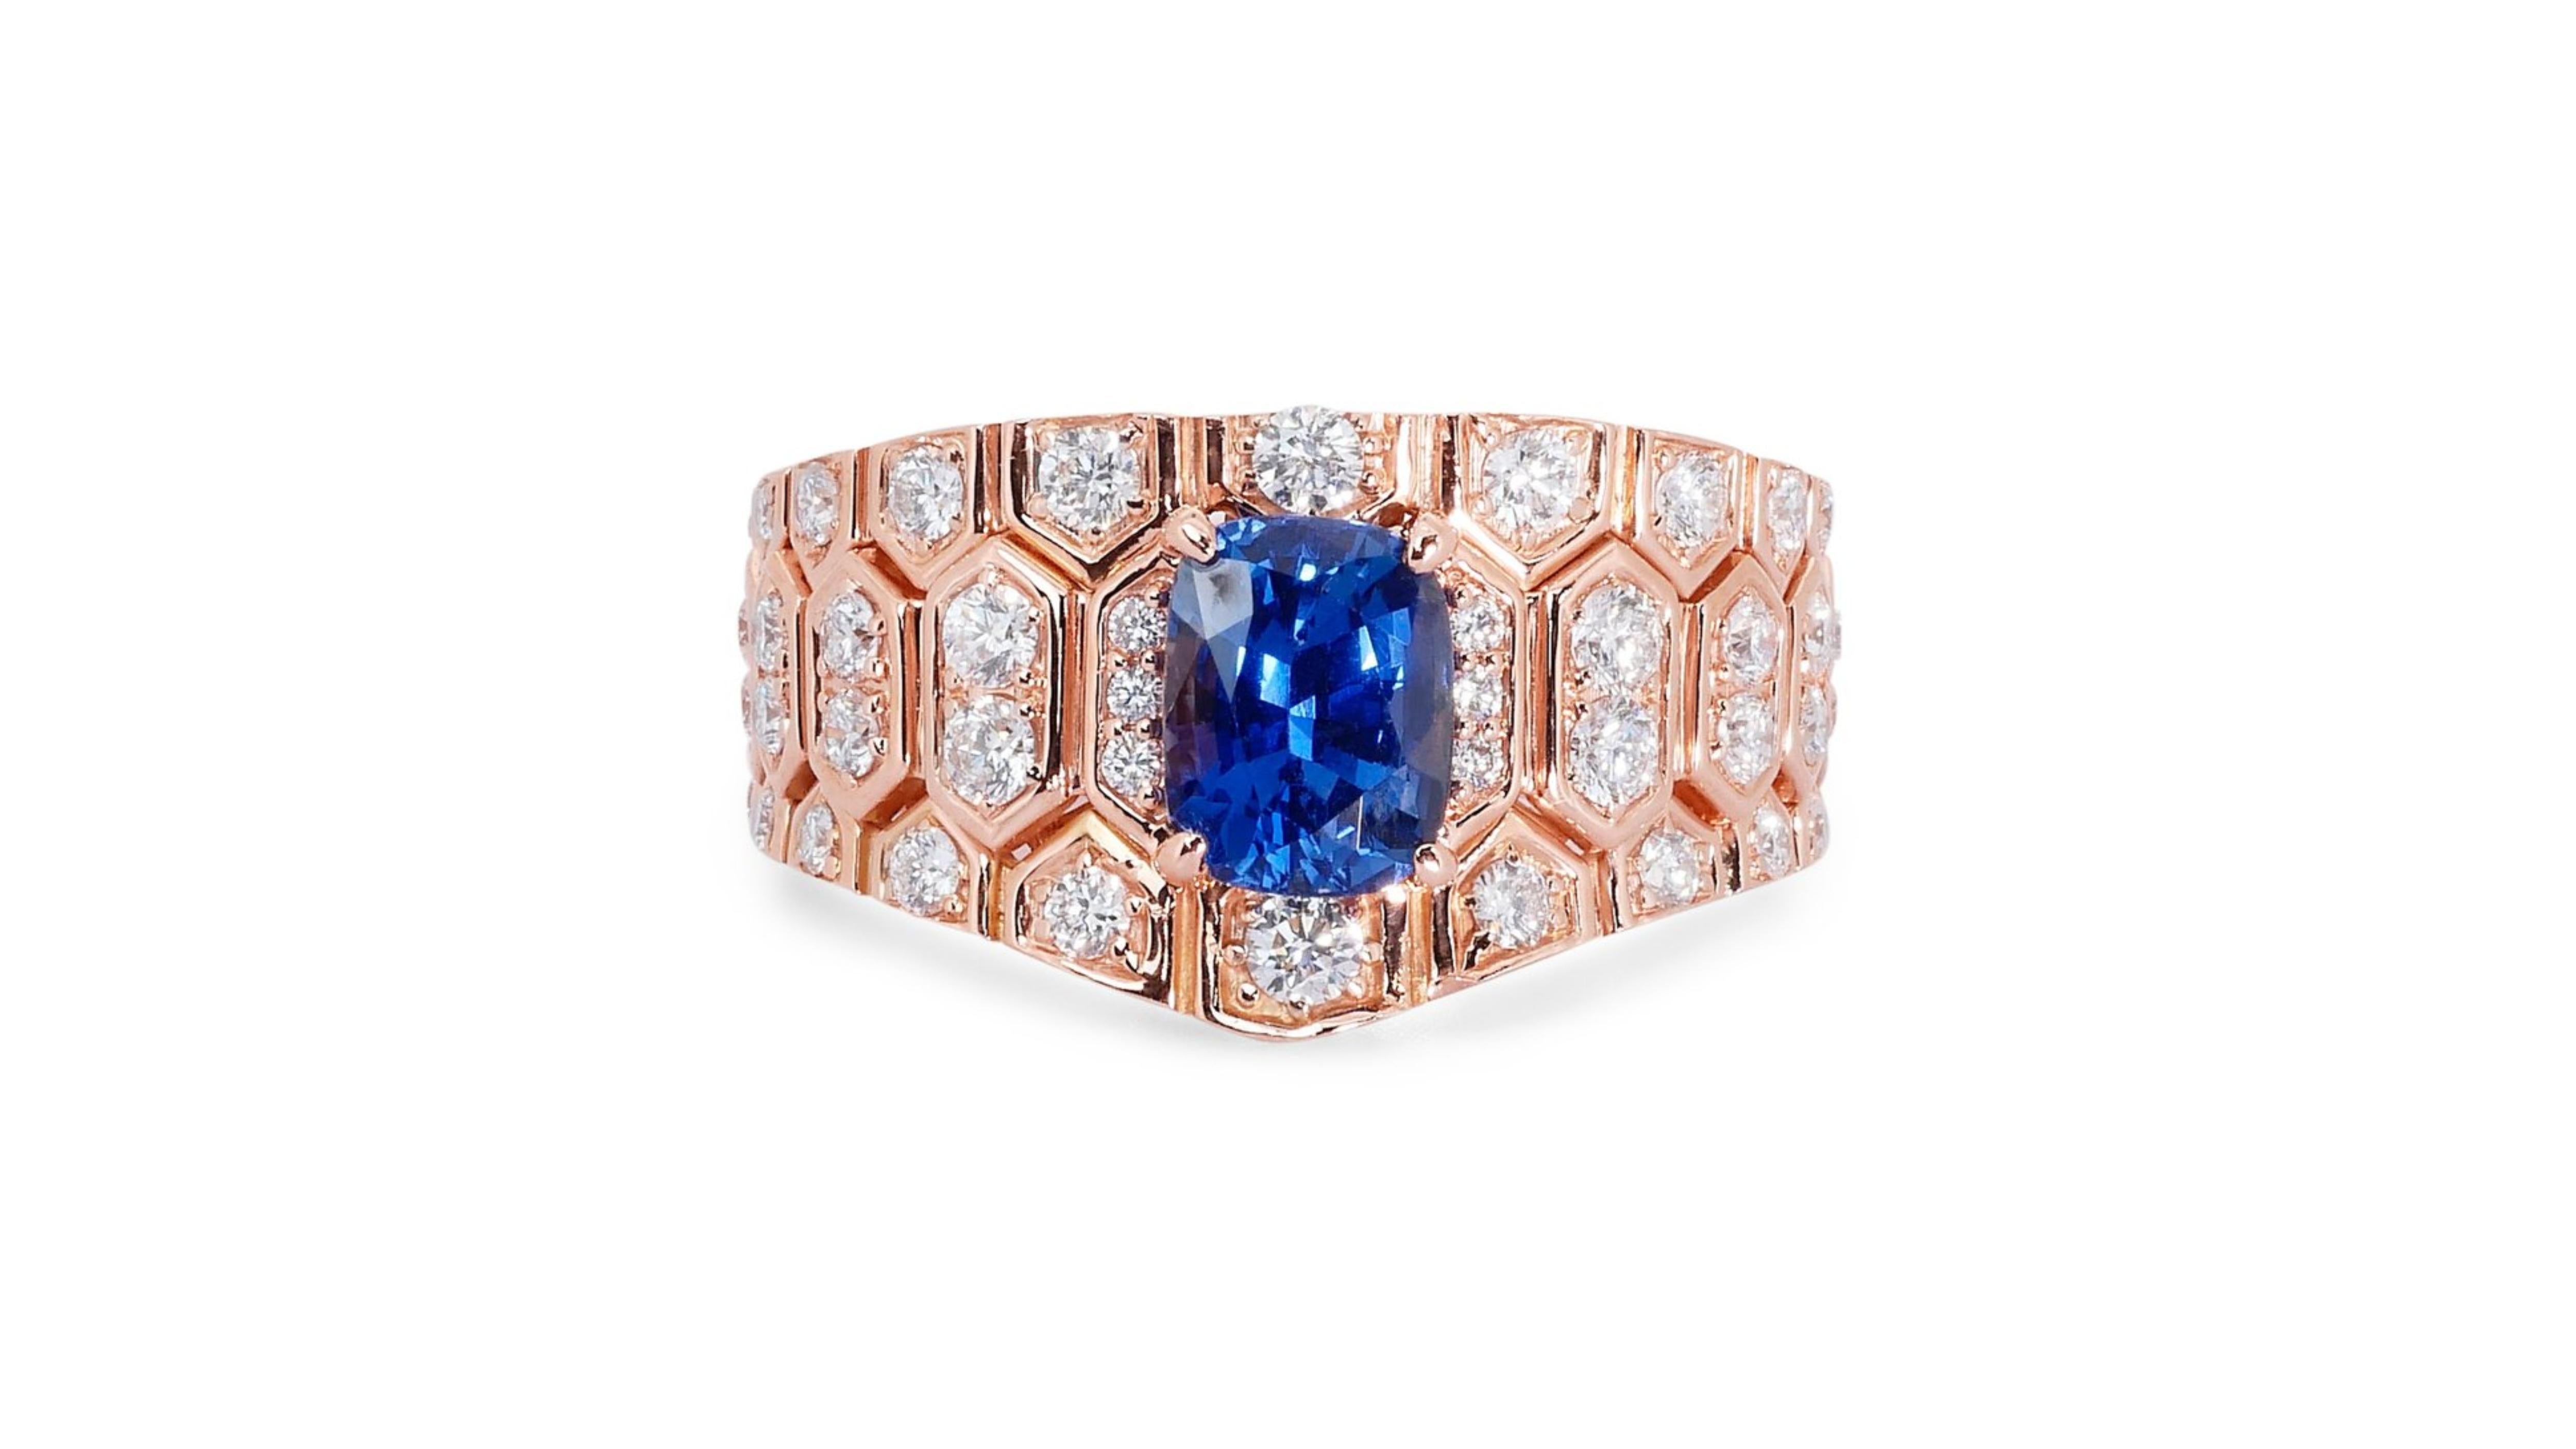 A glamorous dome ring with a dazzling 2.15-carat cushion mixed cut natural sapphire. It has 0.5 carats of side diamonds which add more to its elegance. The jewelry is made of 14K Pink Gold with a high-quality polish. It comes with IGI certificate